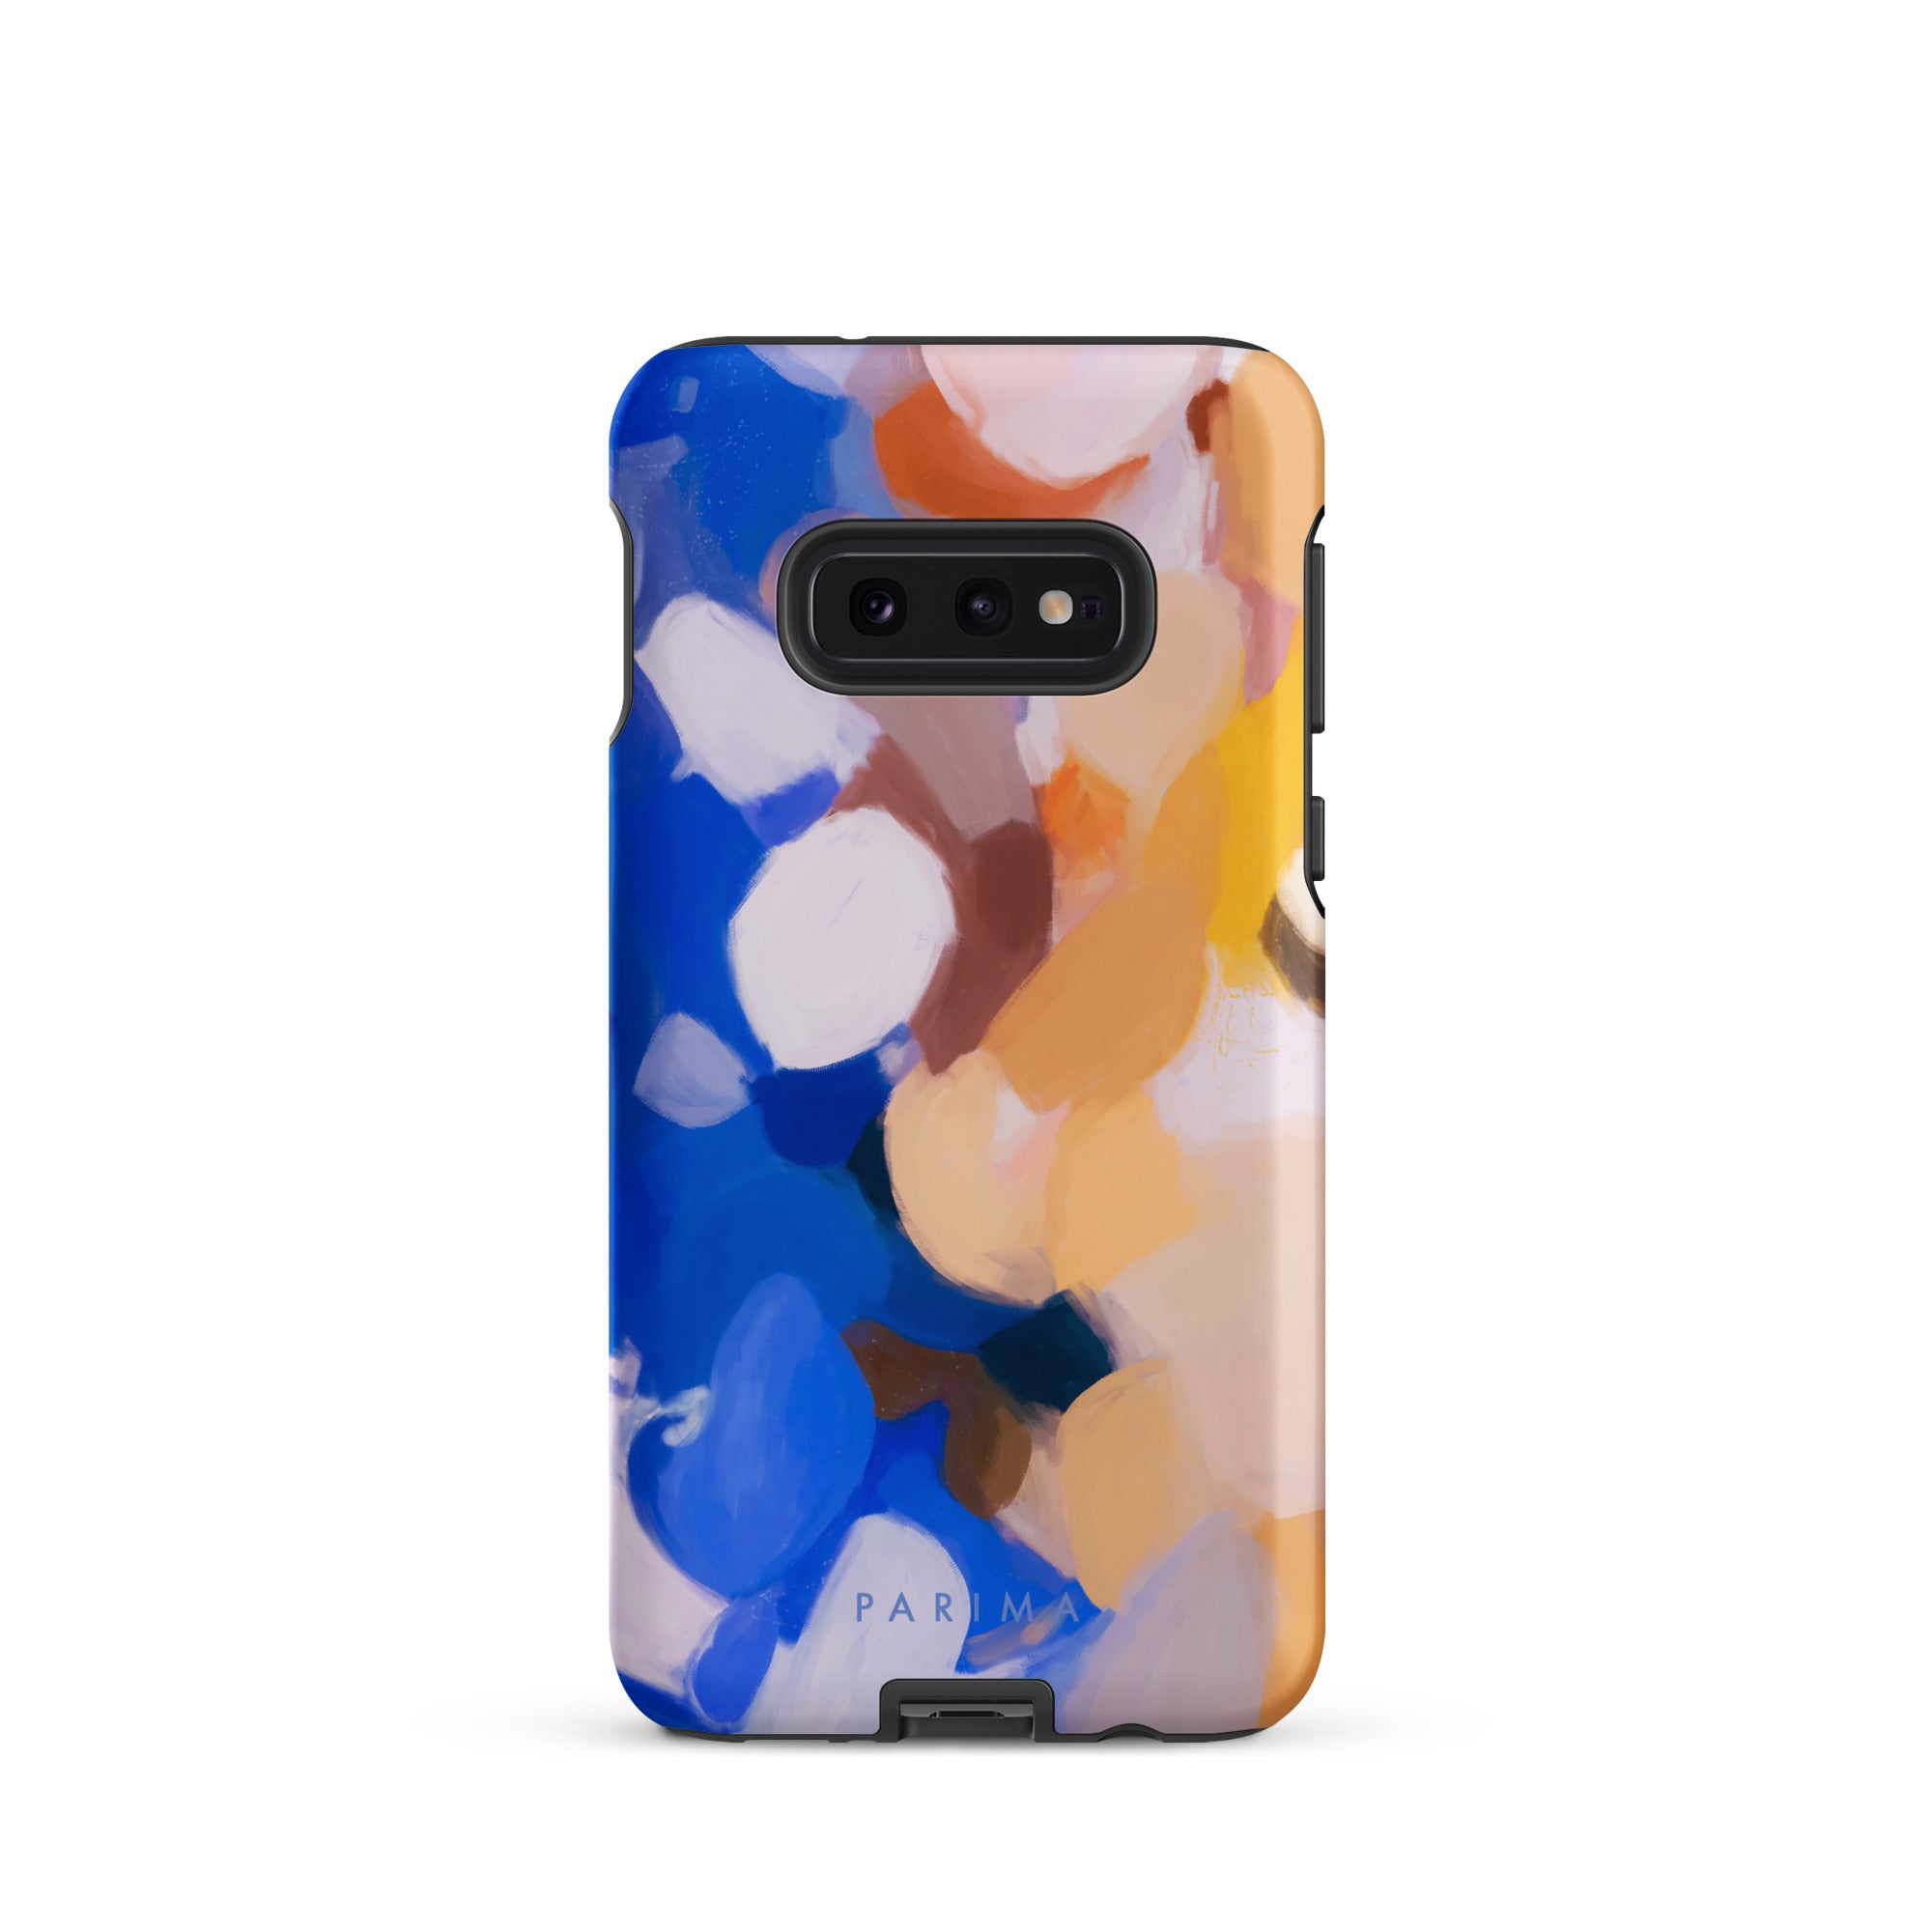 Bluebell, blue and yellow abstract art on Samsung Galaxy S10e tough case by Parima Studio